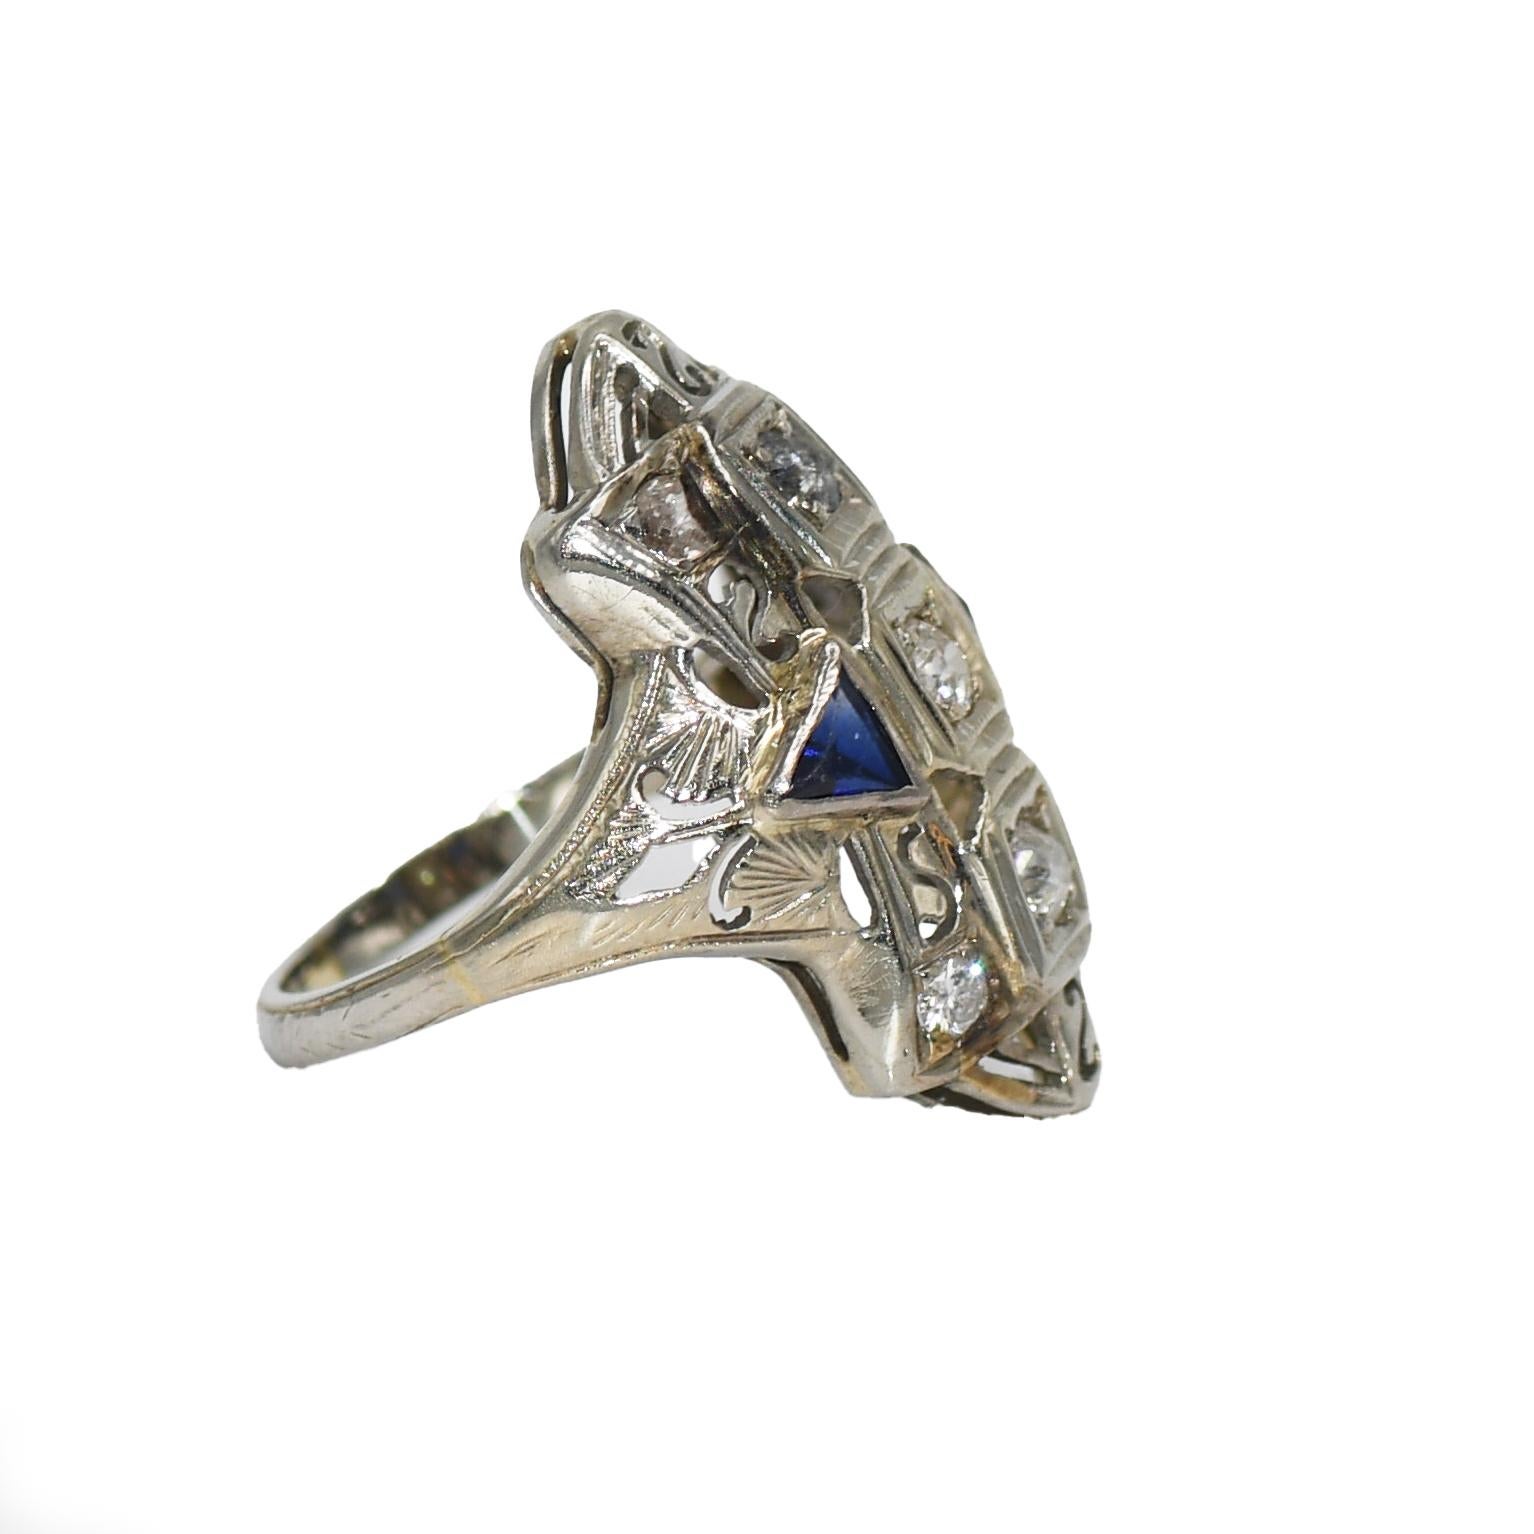 18K White Gold Diamond & Blue Spinel Art Deco Ring 3.4g
Ladies antique, art deco diamond and blue spinel ring with 18k white gold setting.
Tests 18k with an electronic tester and weighs 3.4 grams.
The diamonds are mostly old-mine cuts, approximately